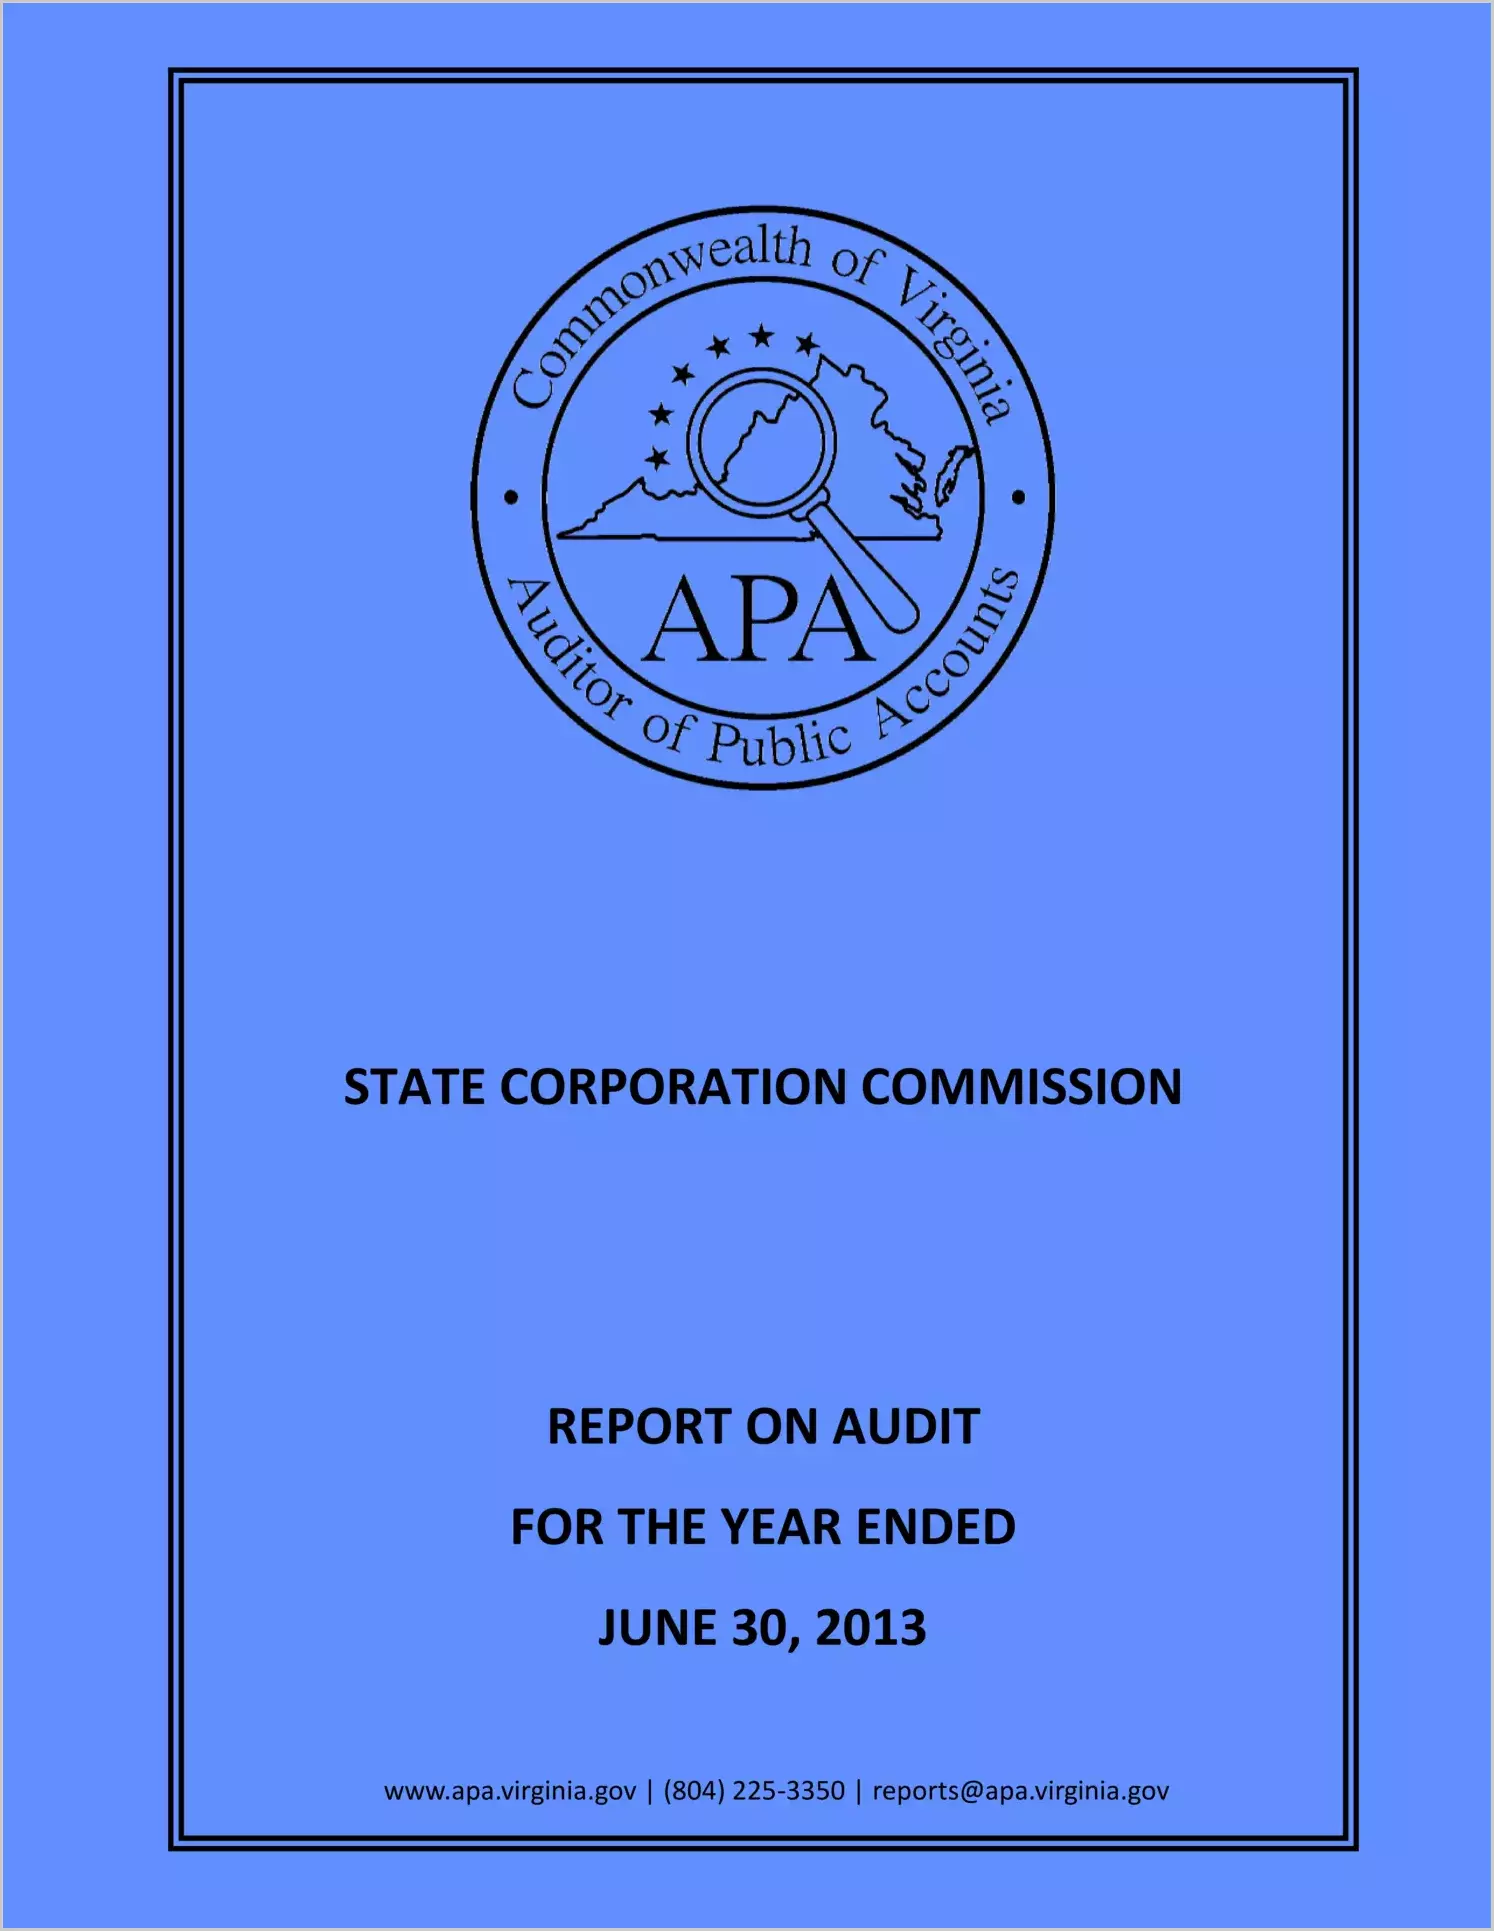 State Corporation Commission for the fiscal year ended June 30, 2013